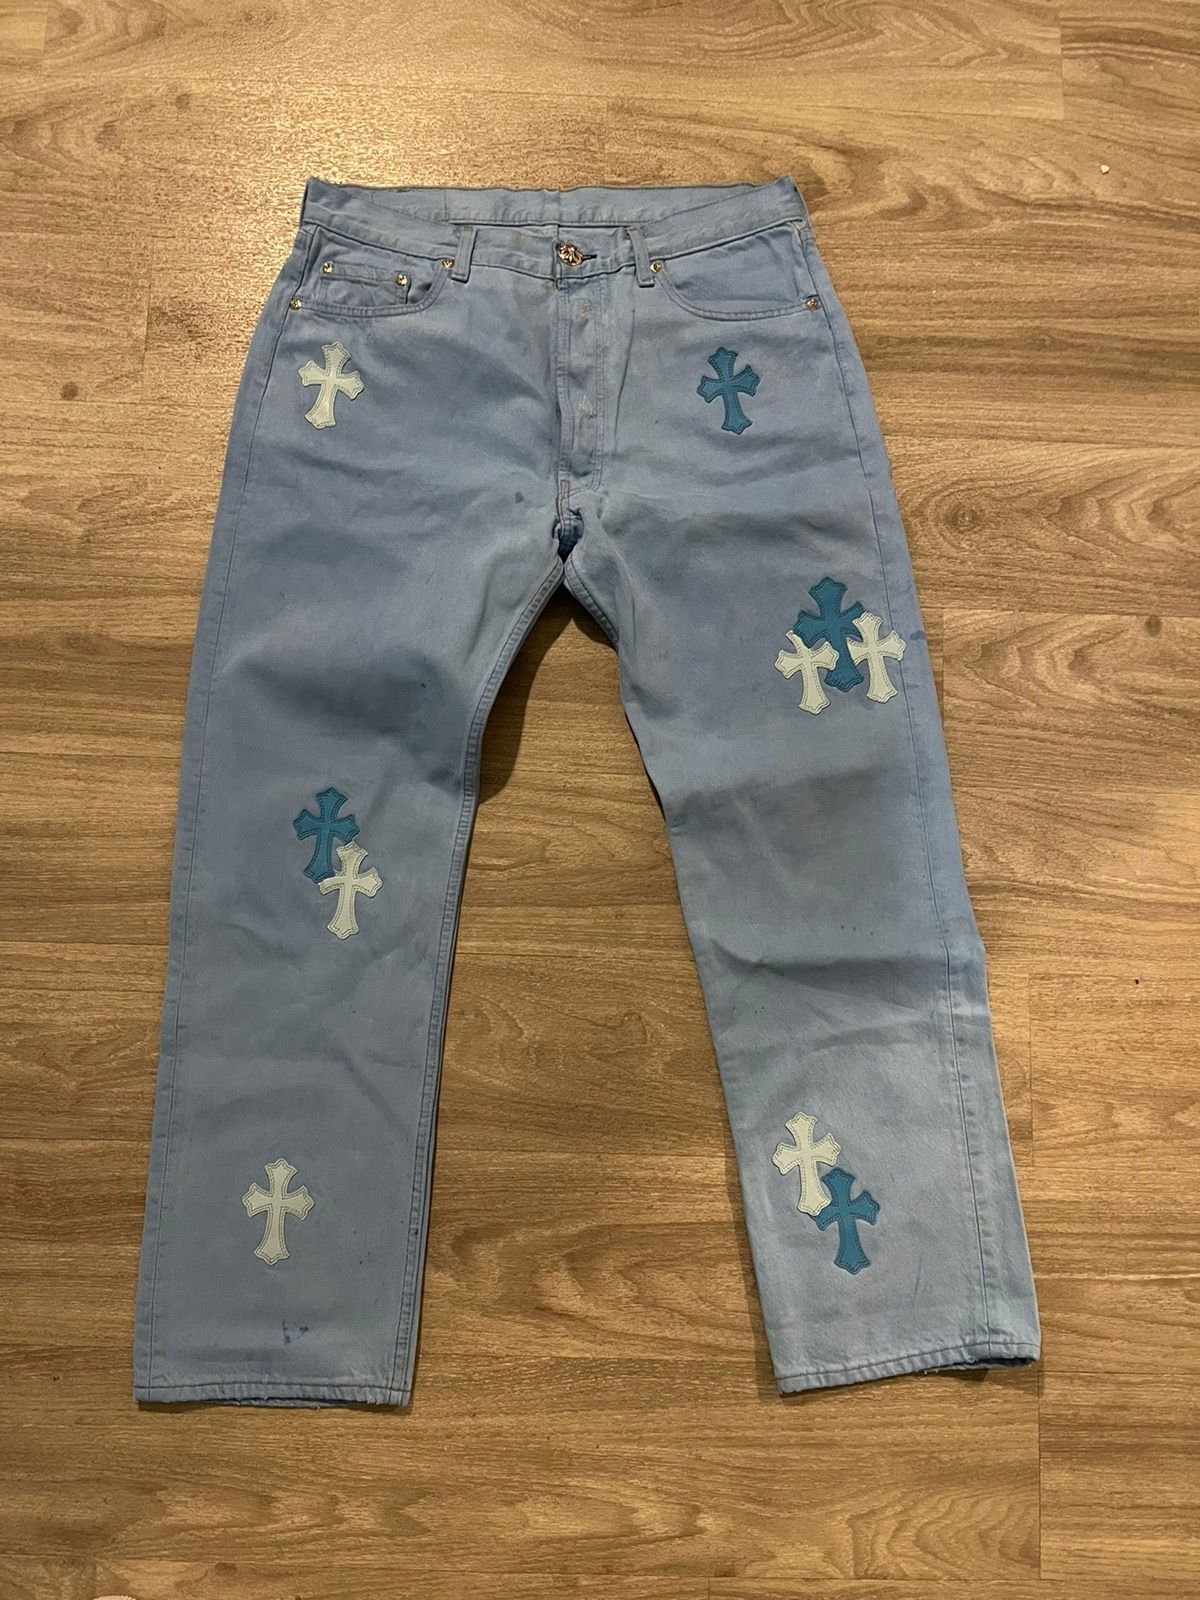 Chrome Hearts x Drake Certified Lover Boy Vintage Levi's Jeans Washed Blue  (Miami Exclusive) Men's - US